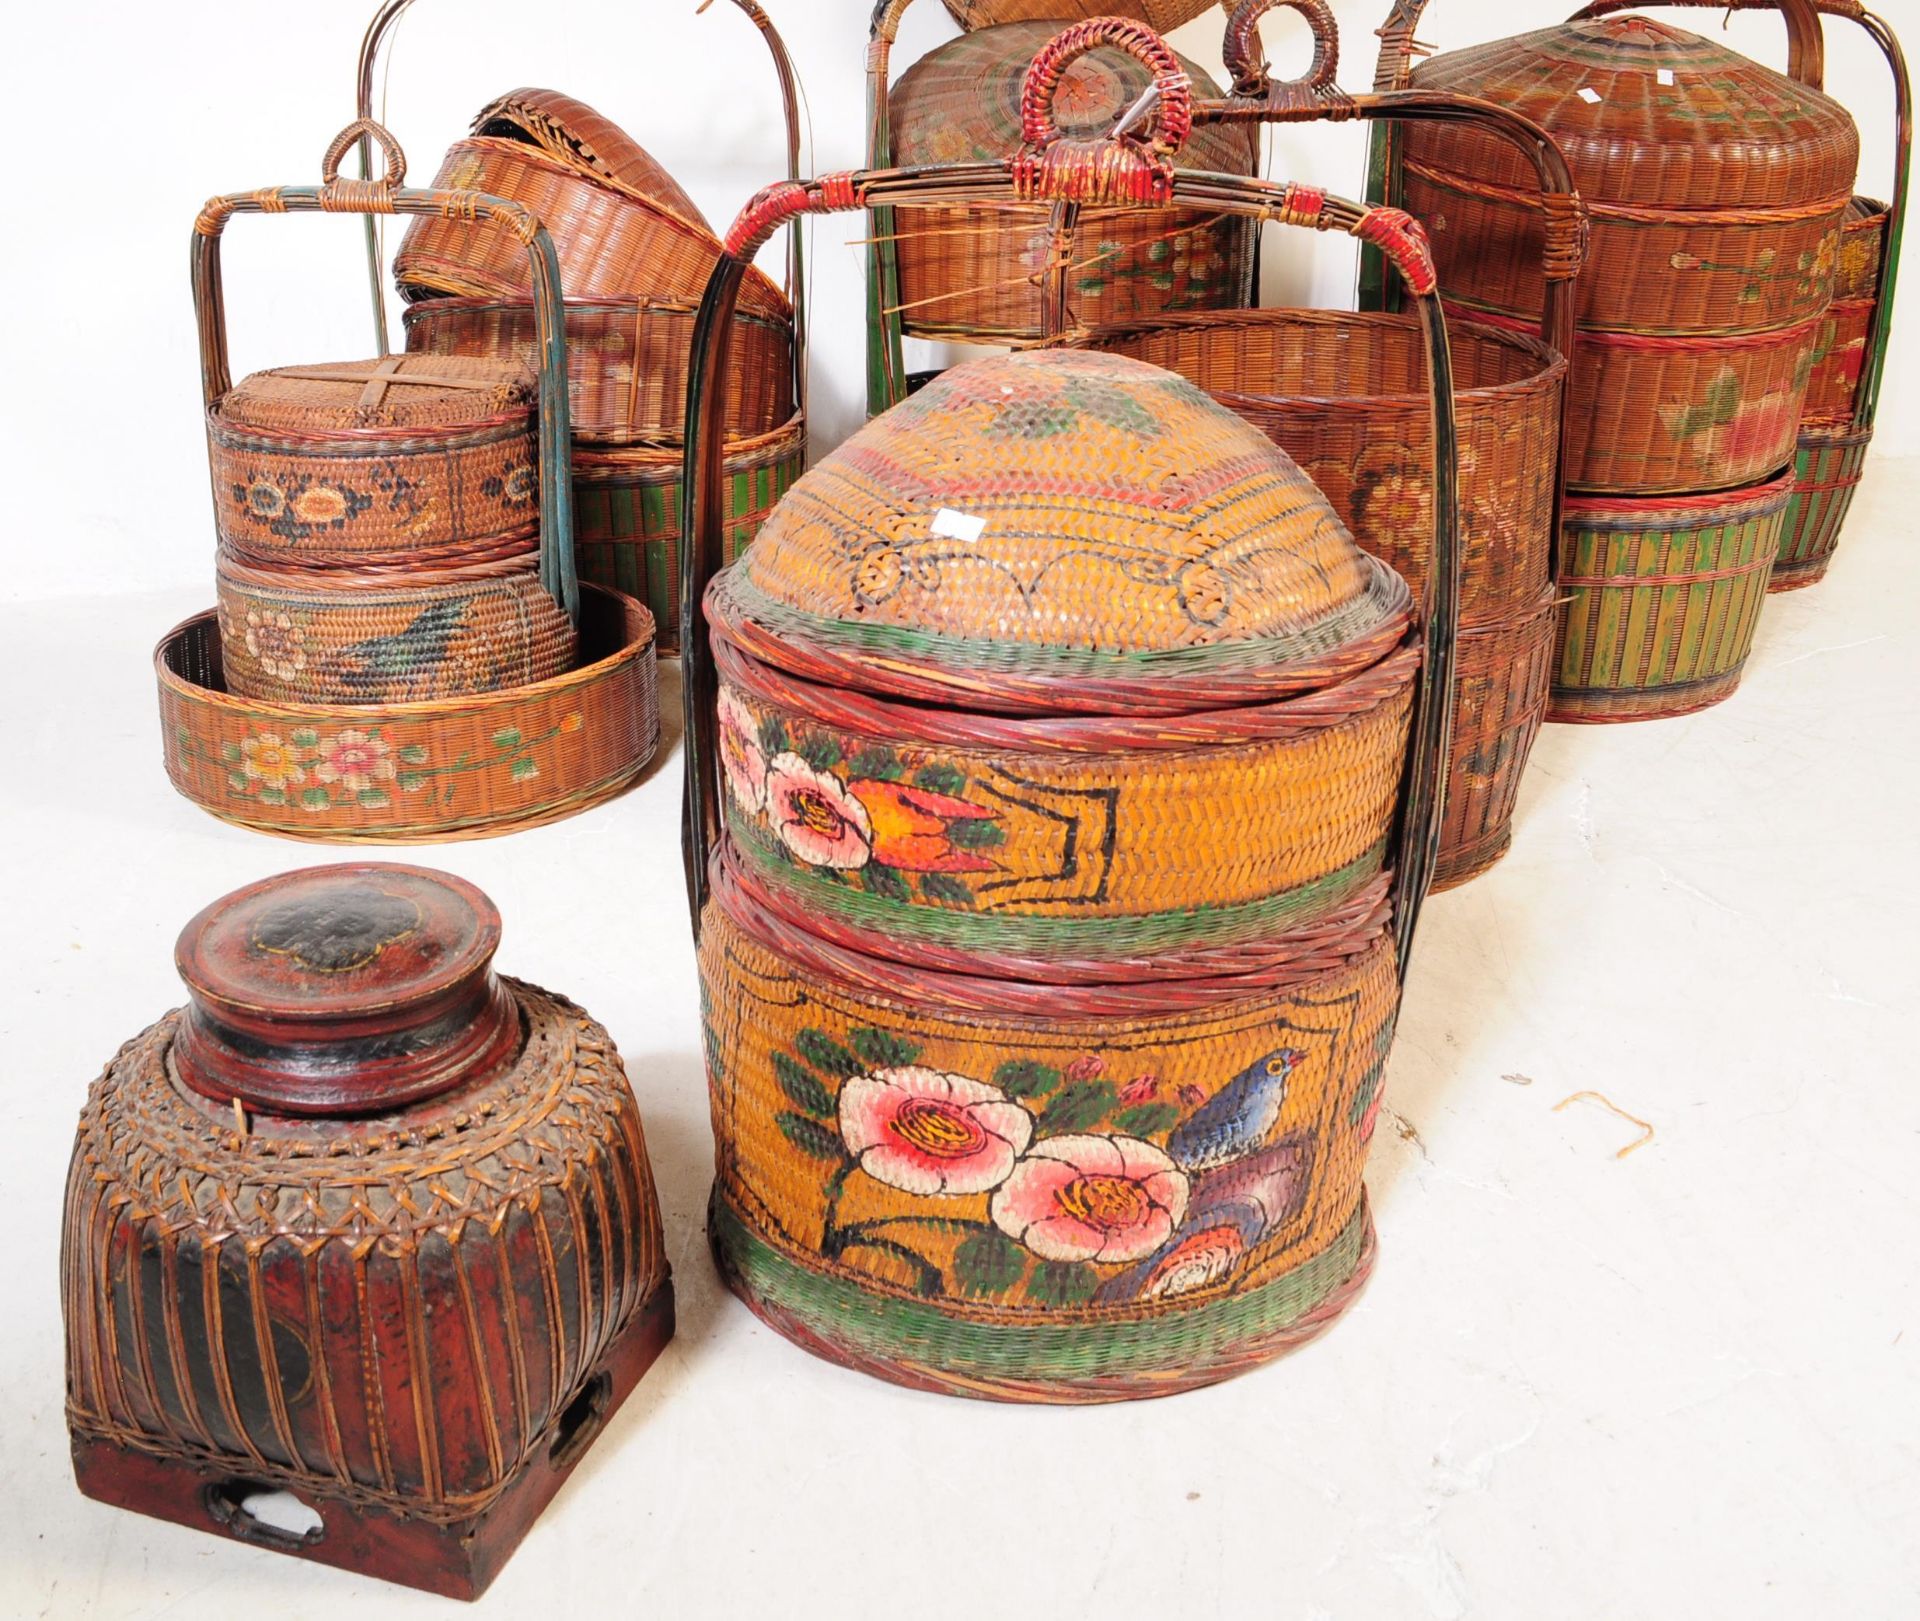 COLLECTION OF APPROXIMATELY ELEVEN CHINESE WOVEN BASKETS - Image 2 of 3